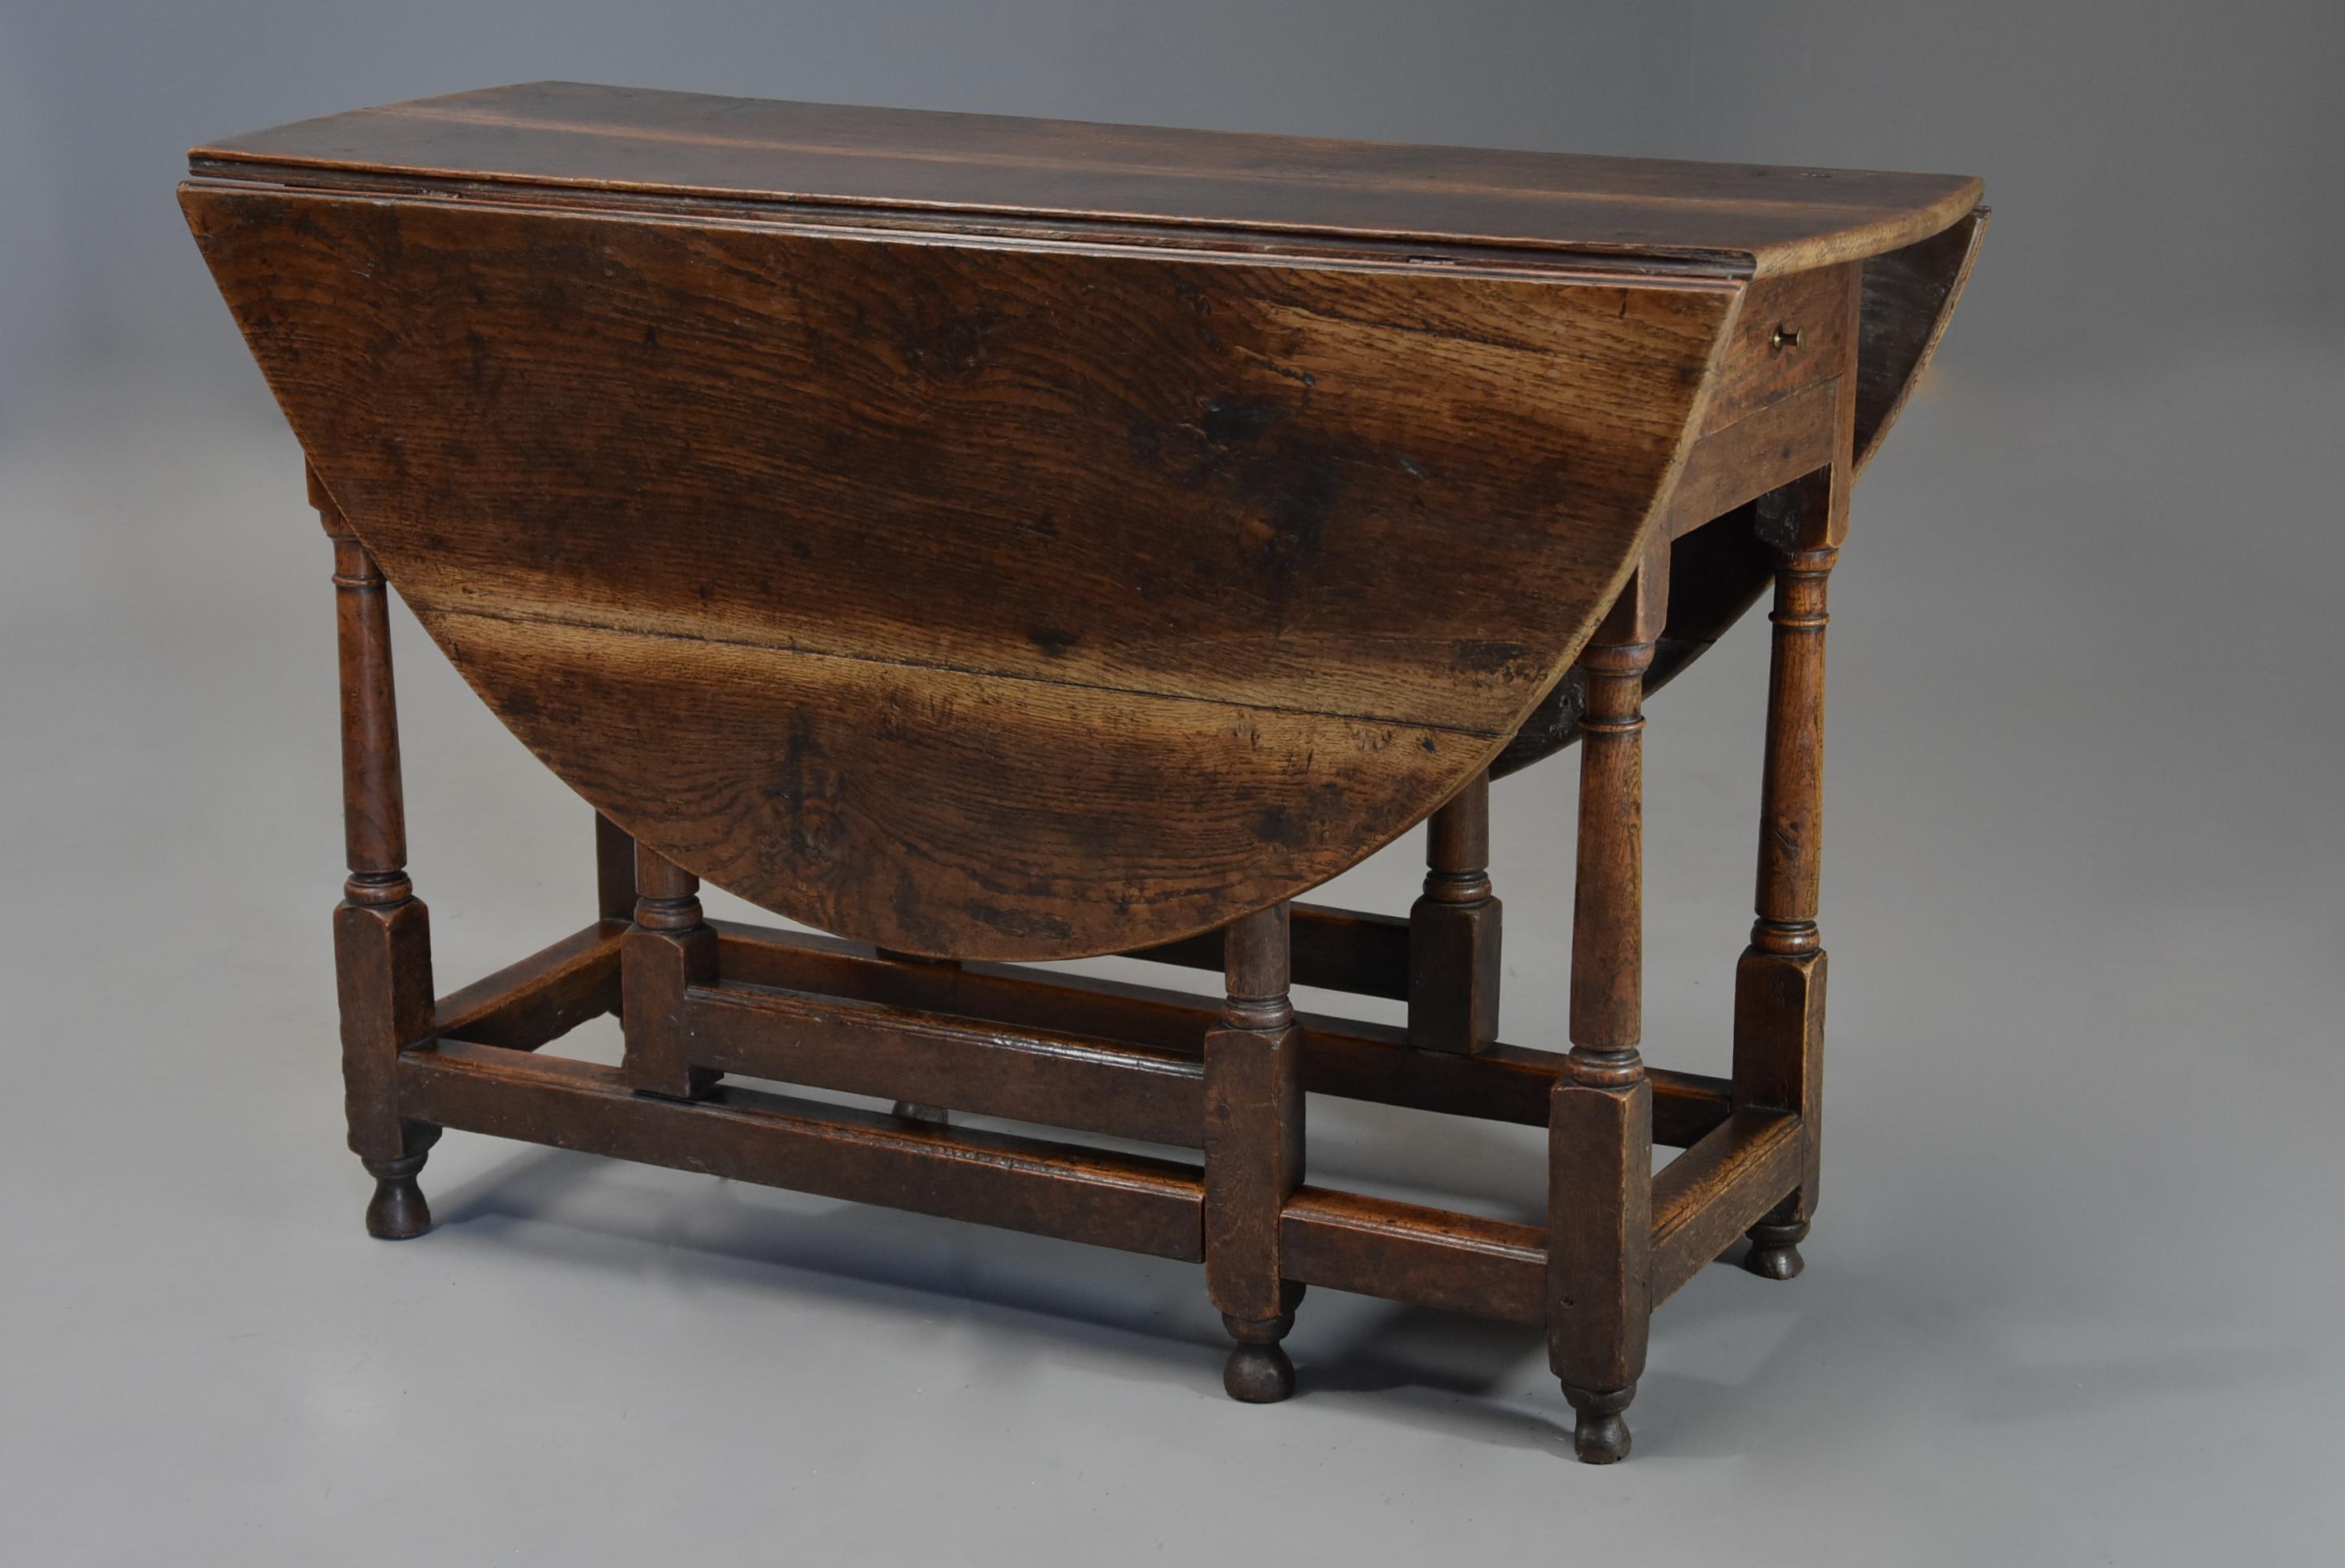 English Early 18th Century Oak Gateleg Table with Superb Original Patina For Sale 5